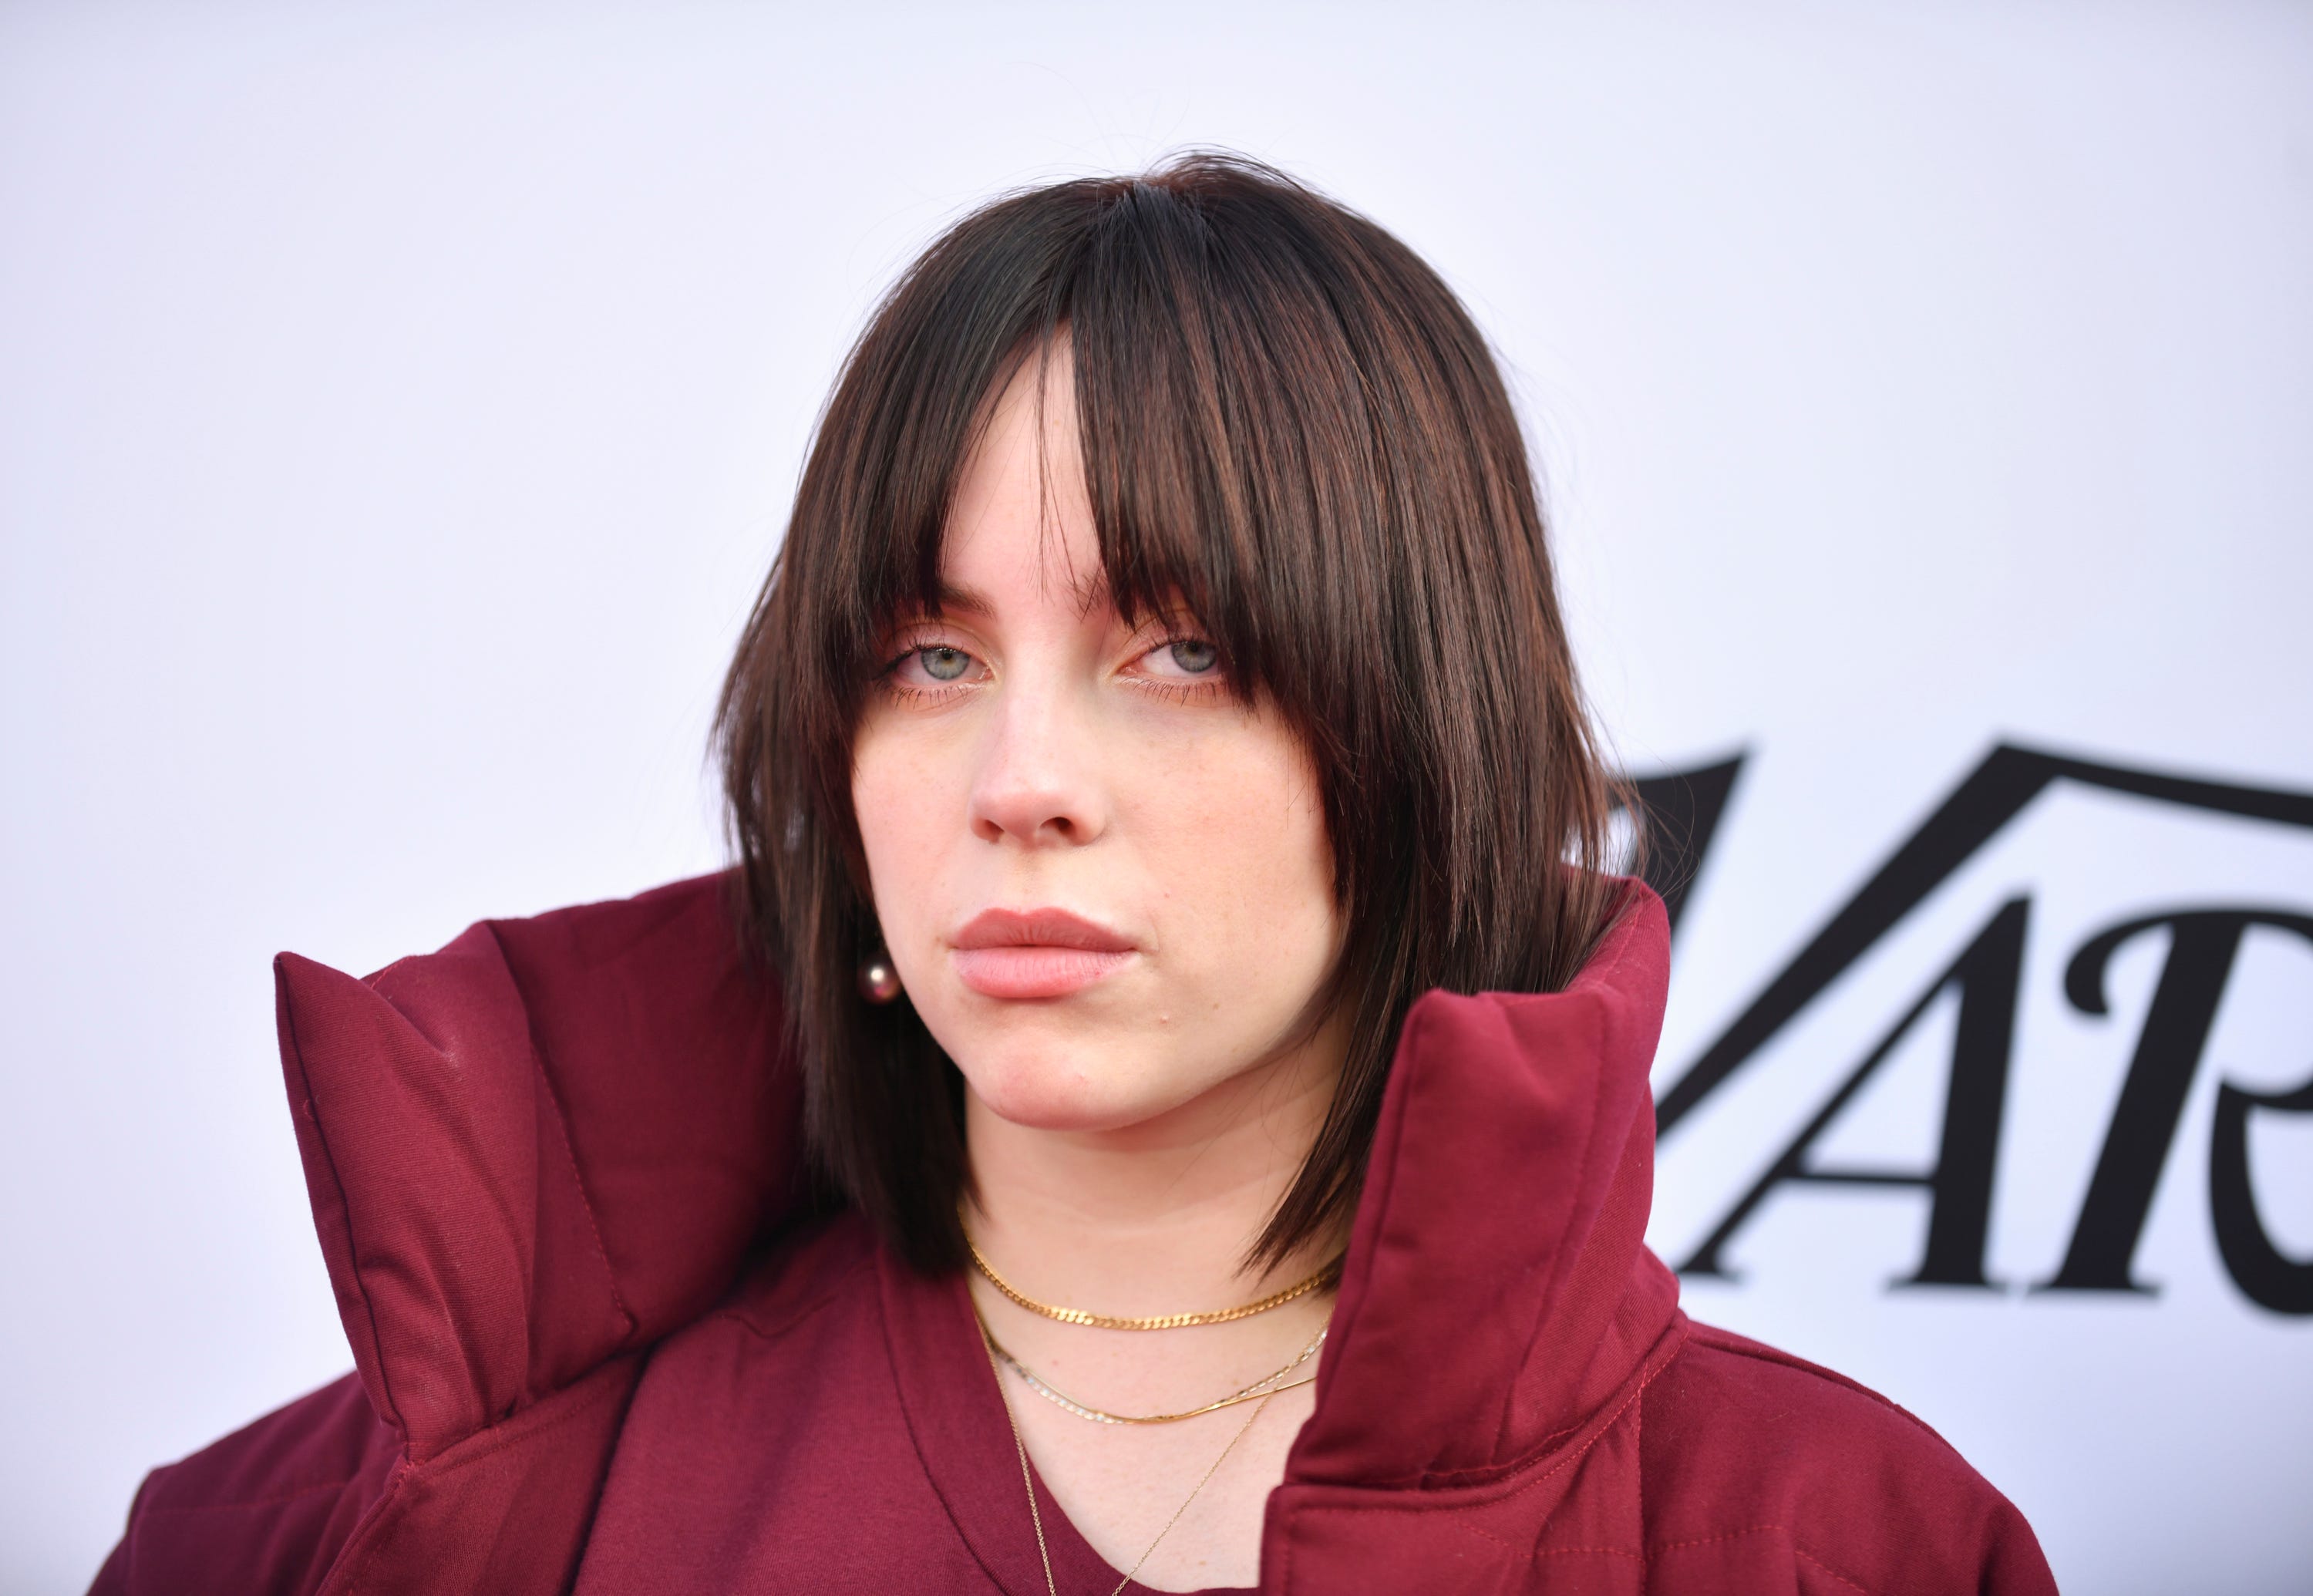 Watch The Sex Video Of A 18yr Old - Porn is distorting children's view of sex. Just ask Billie Eilish.